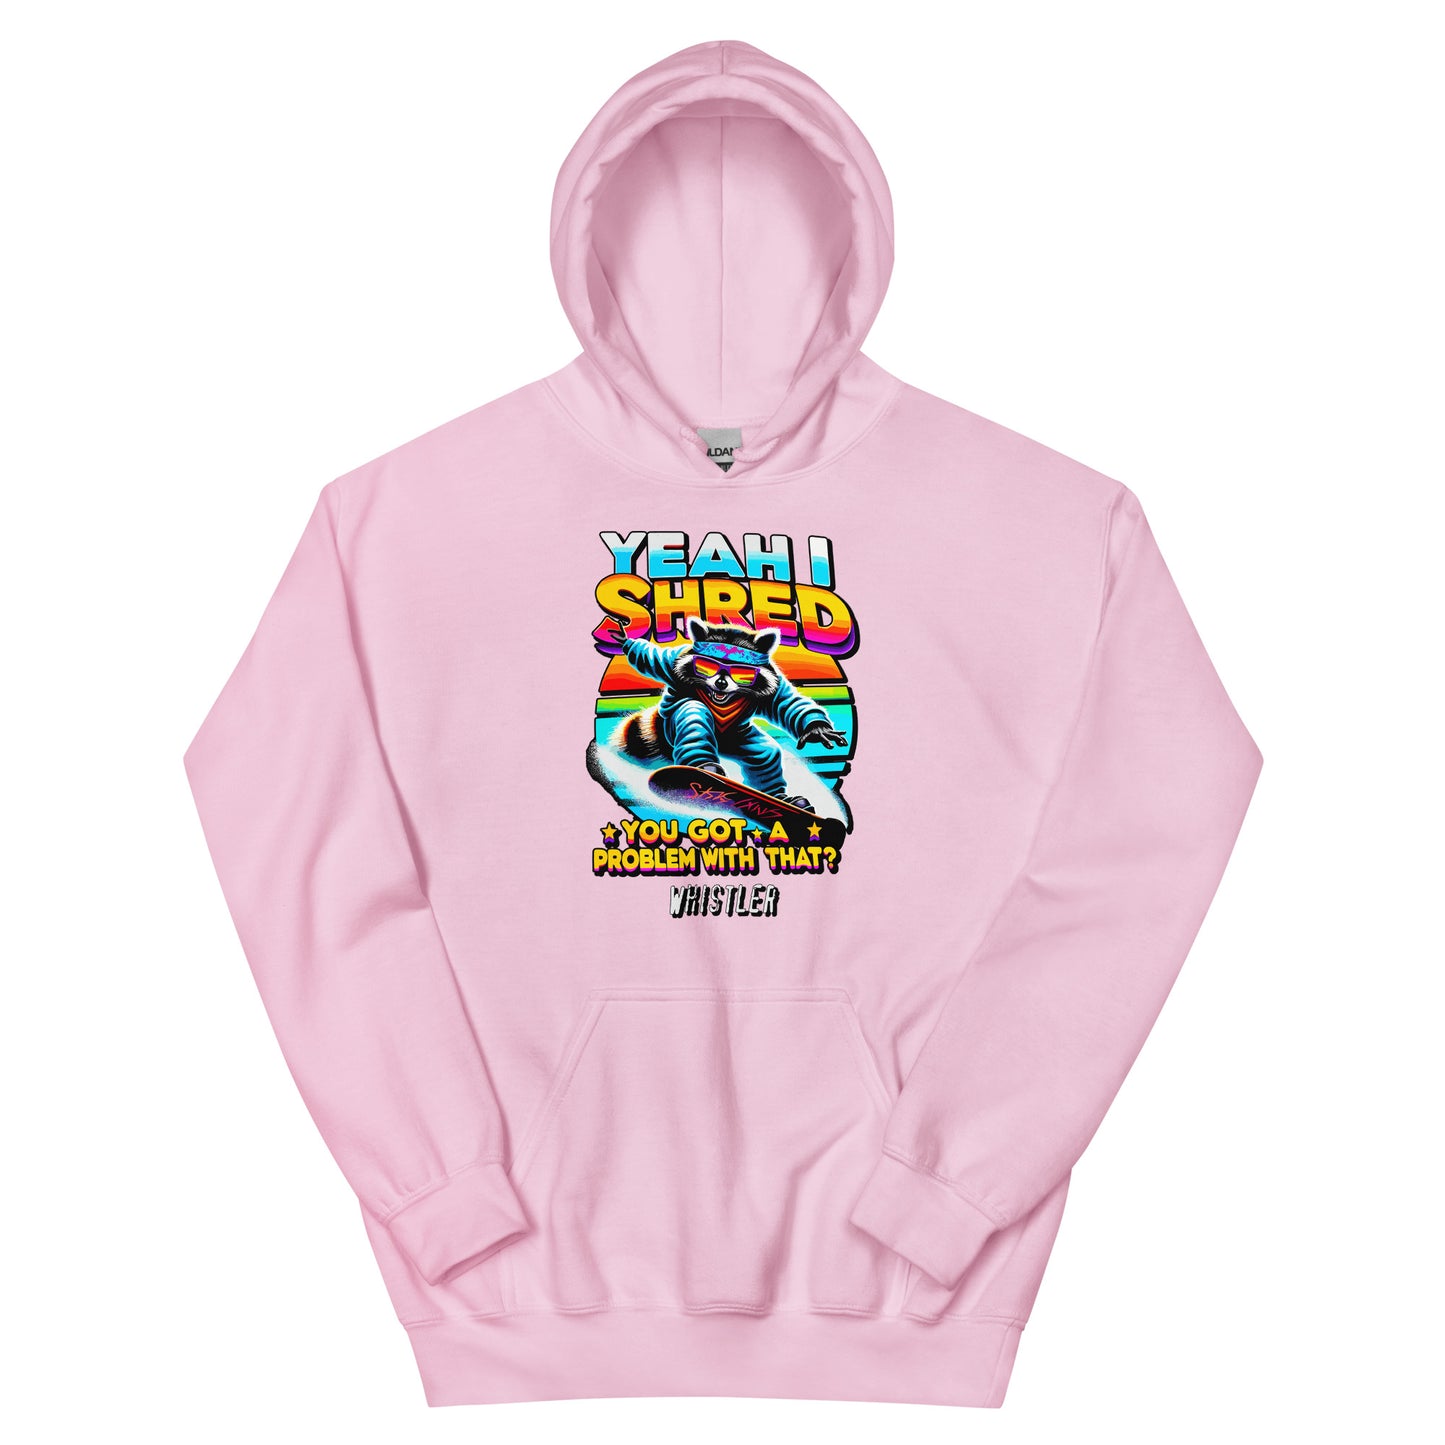 Yeah I shred you got a problem with that? Whistler printed hoodie by Whistler Shirts